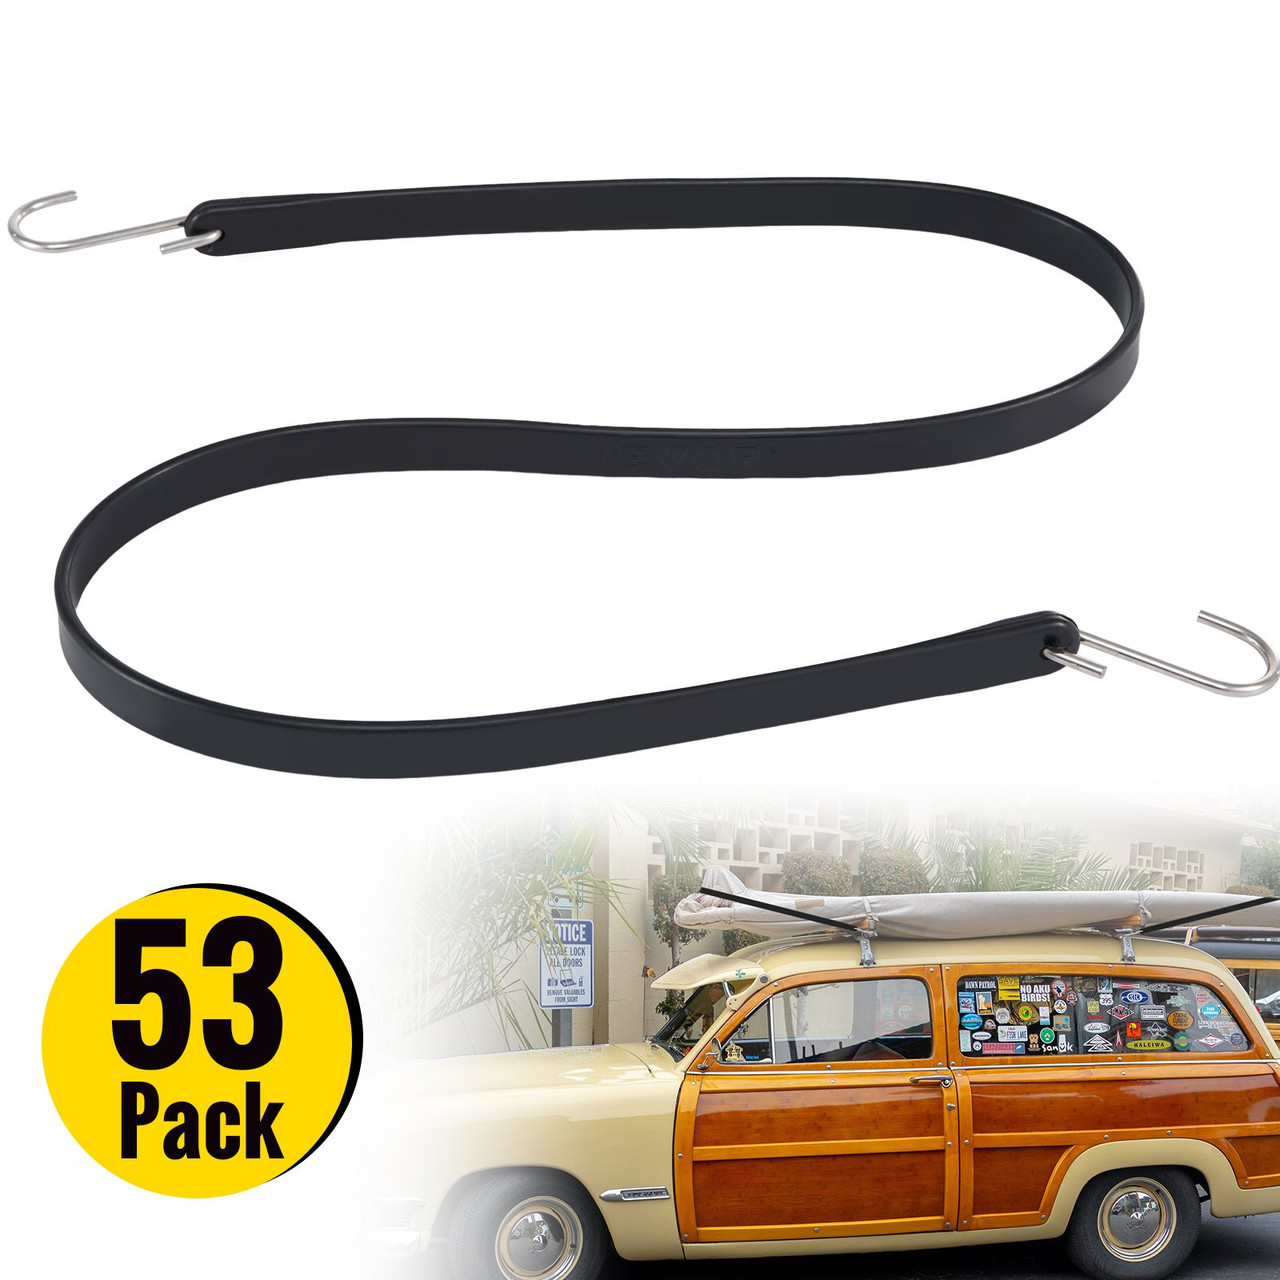 Rubber Bungee Cords Rubber Trap Straps EPDM 53 Pack 31" Long with S Hooks